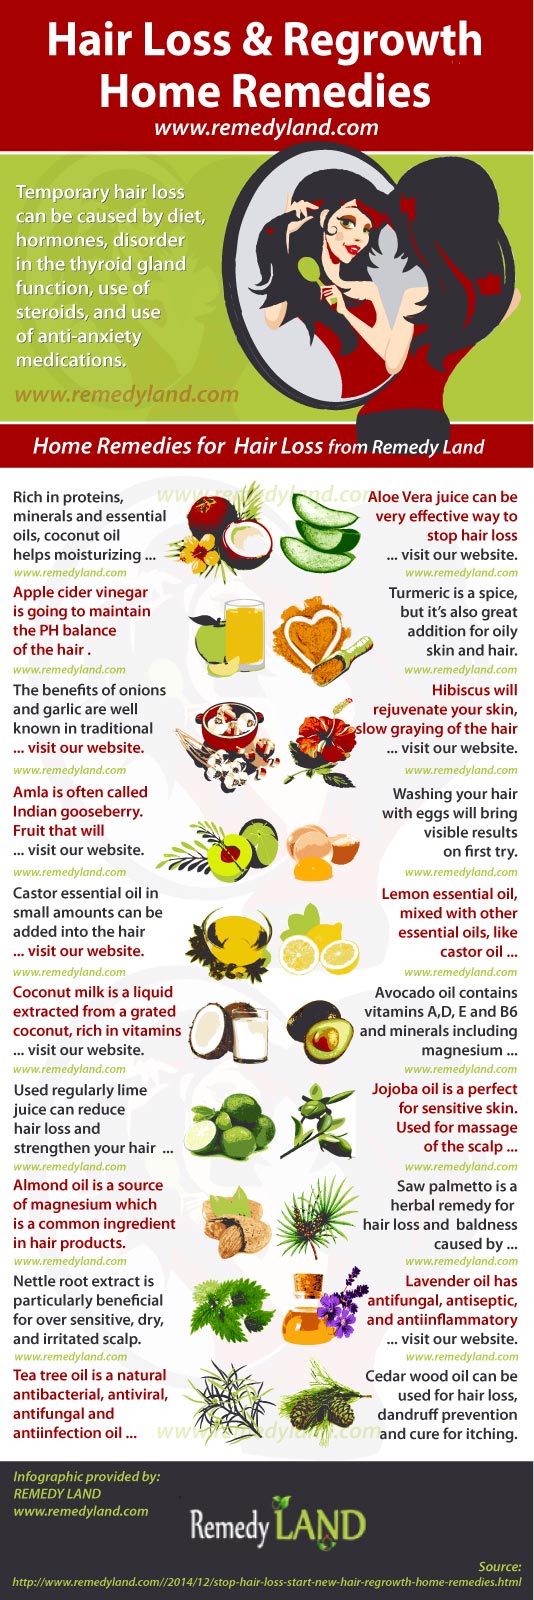 Stop hair loss and start hair regrowth with home remedies - Remedy Land